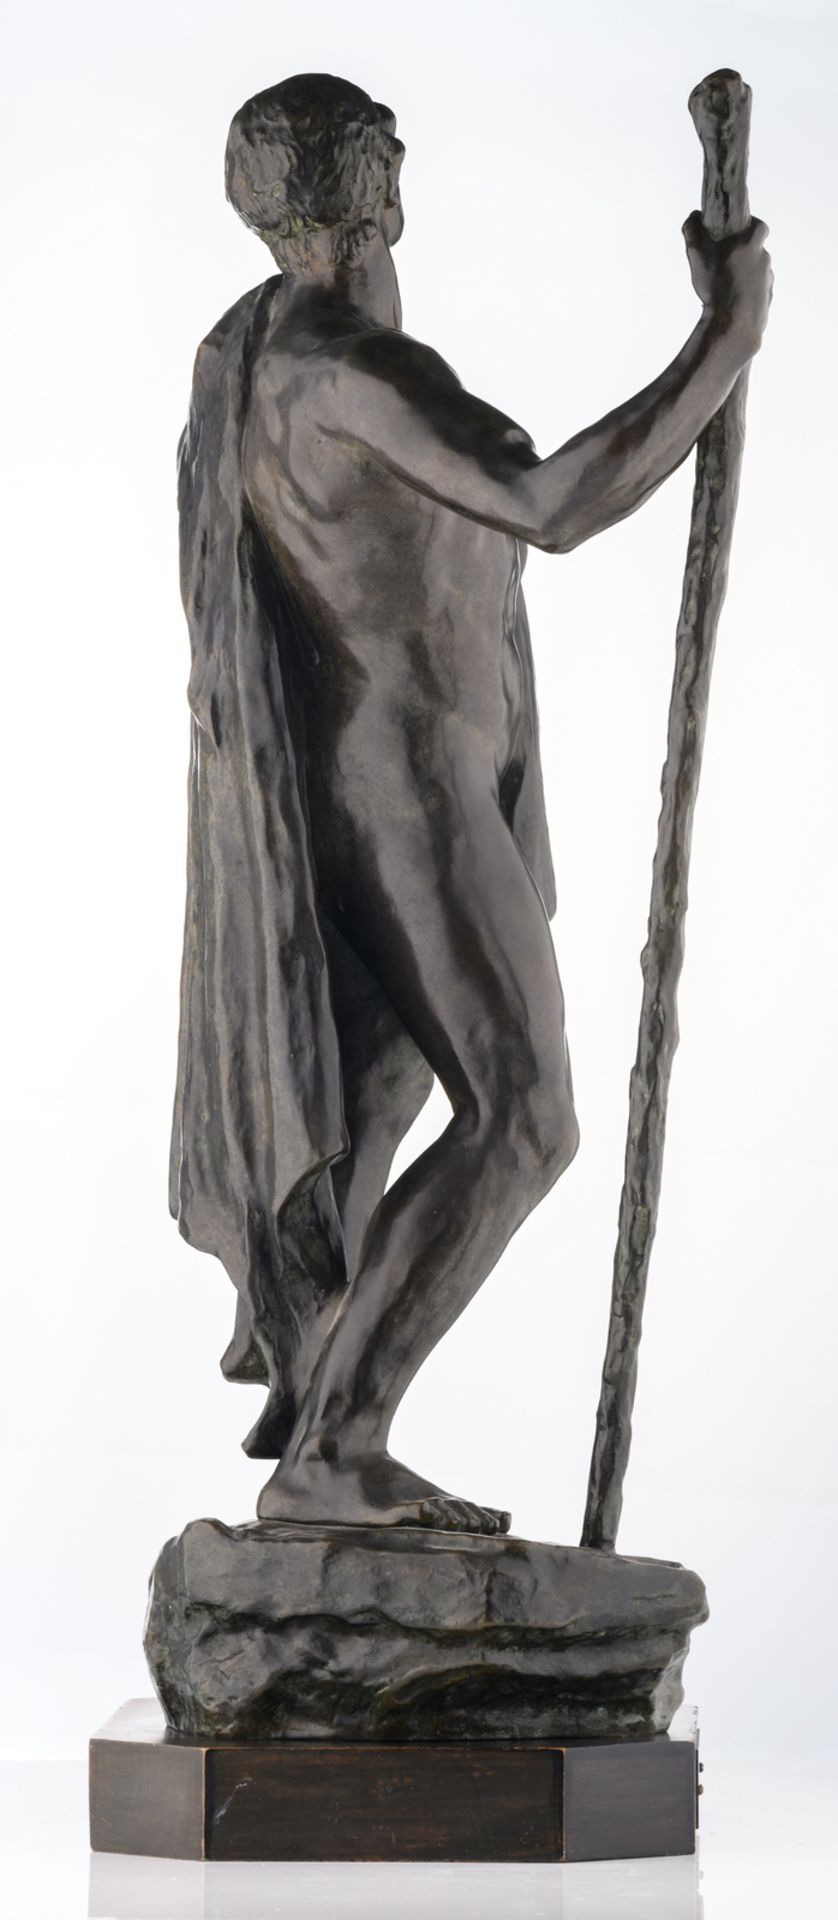 Colin G., 'Le chemin parcouru', patinated bronze, on a wooden base with dedication to Emile - Bild 5 aus 9